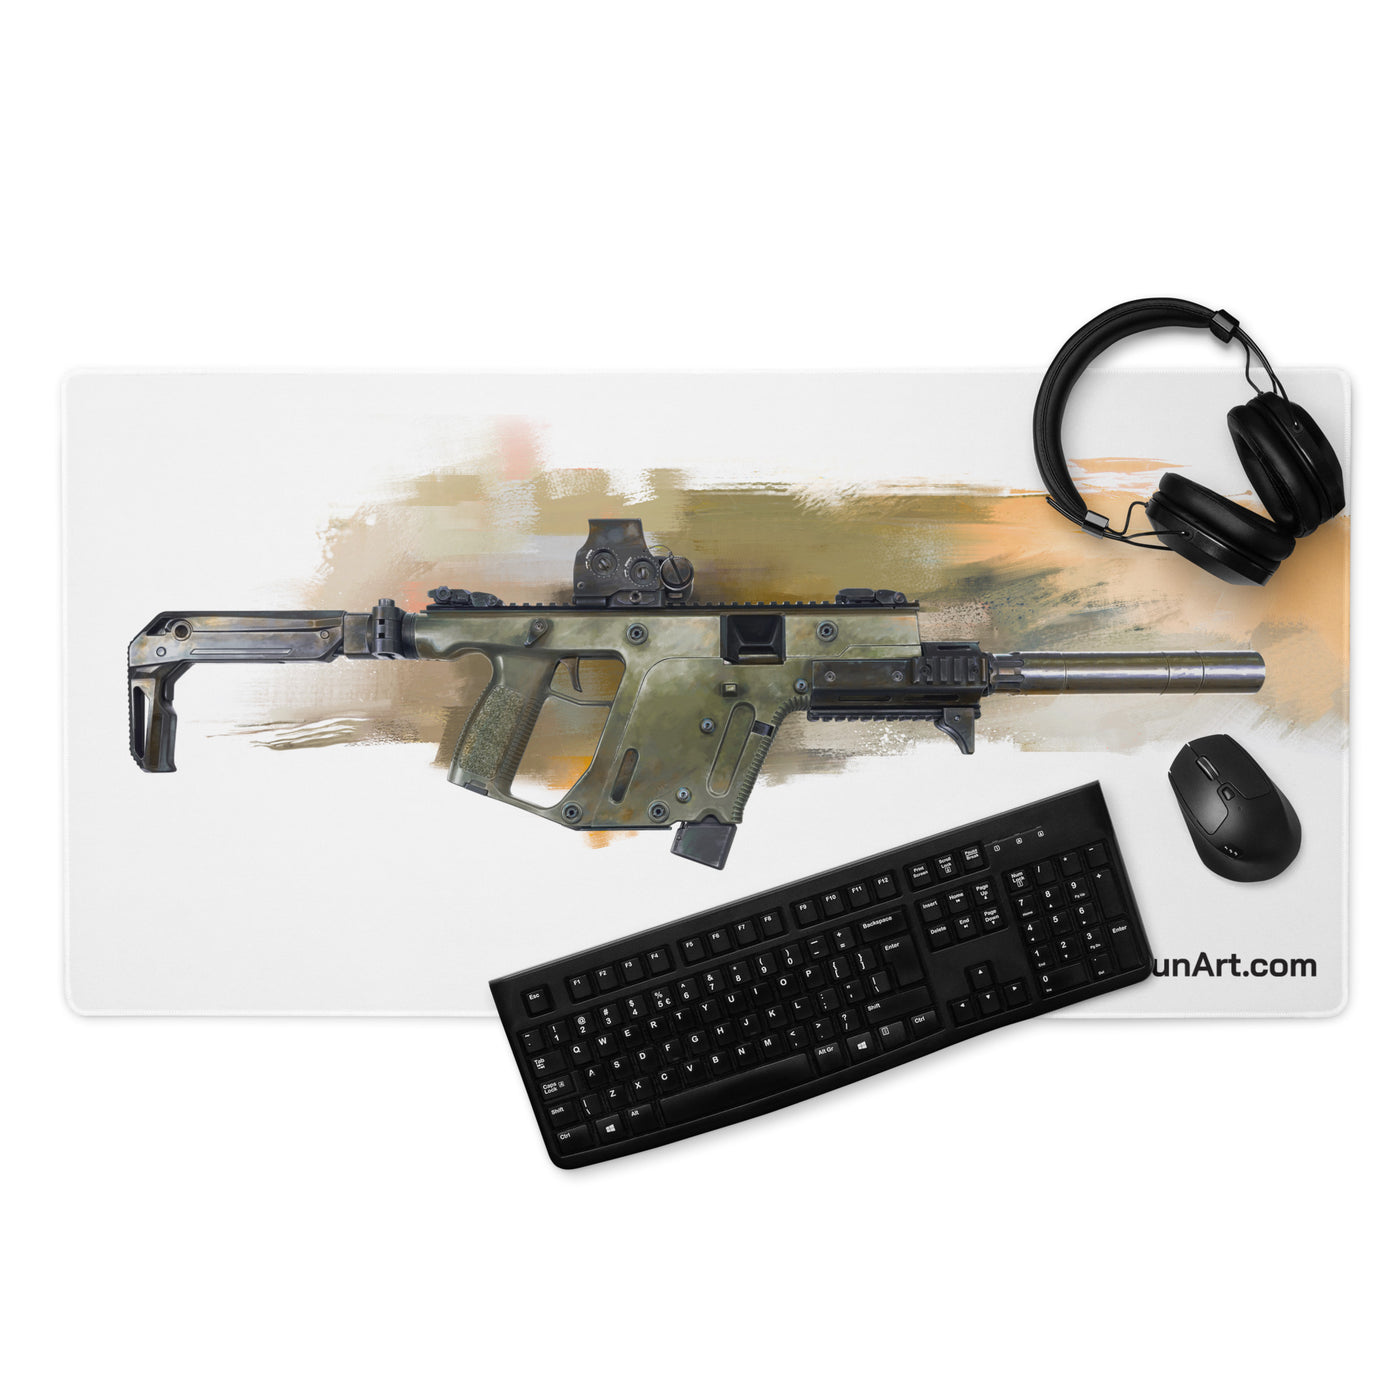 The Vindicator - Suppressed SMG Gaming Mouse Pad - Yellow Background